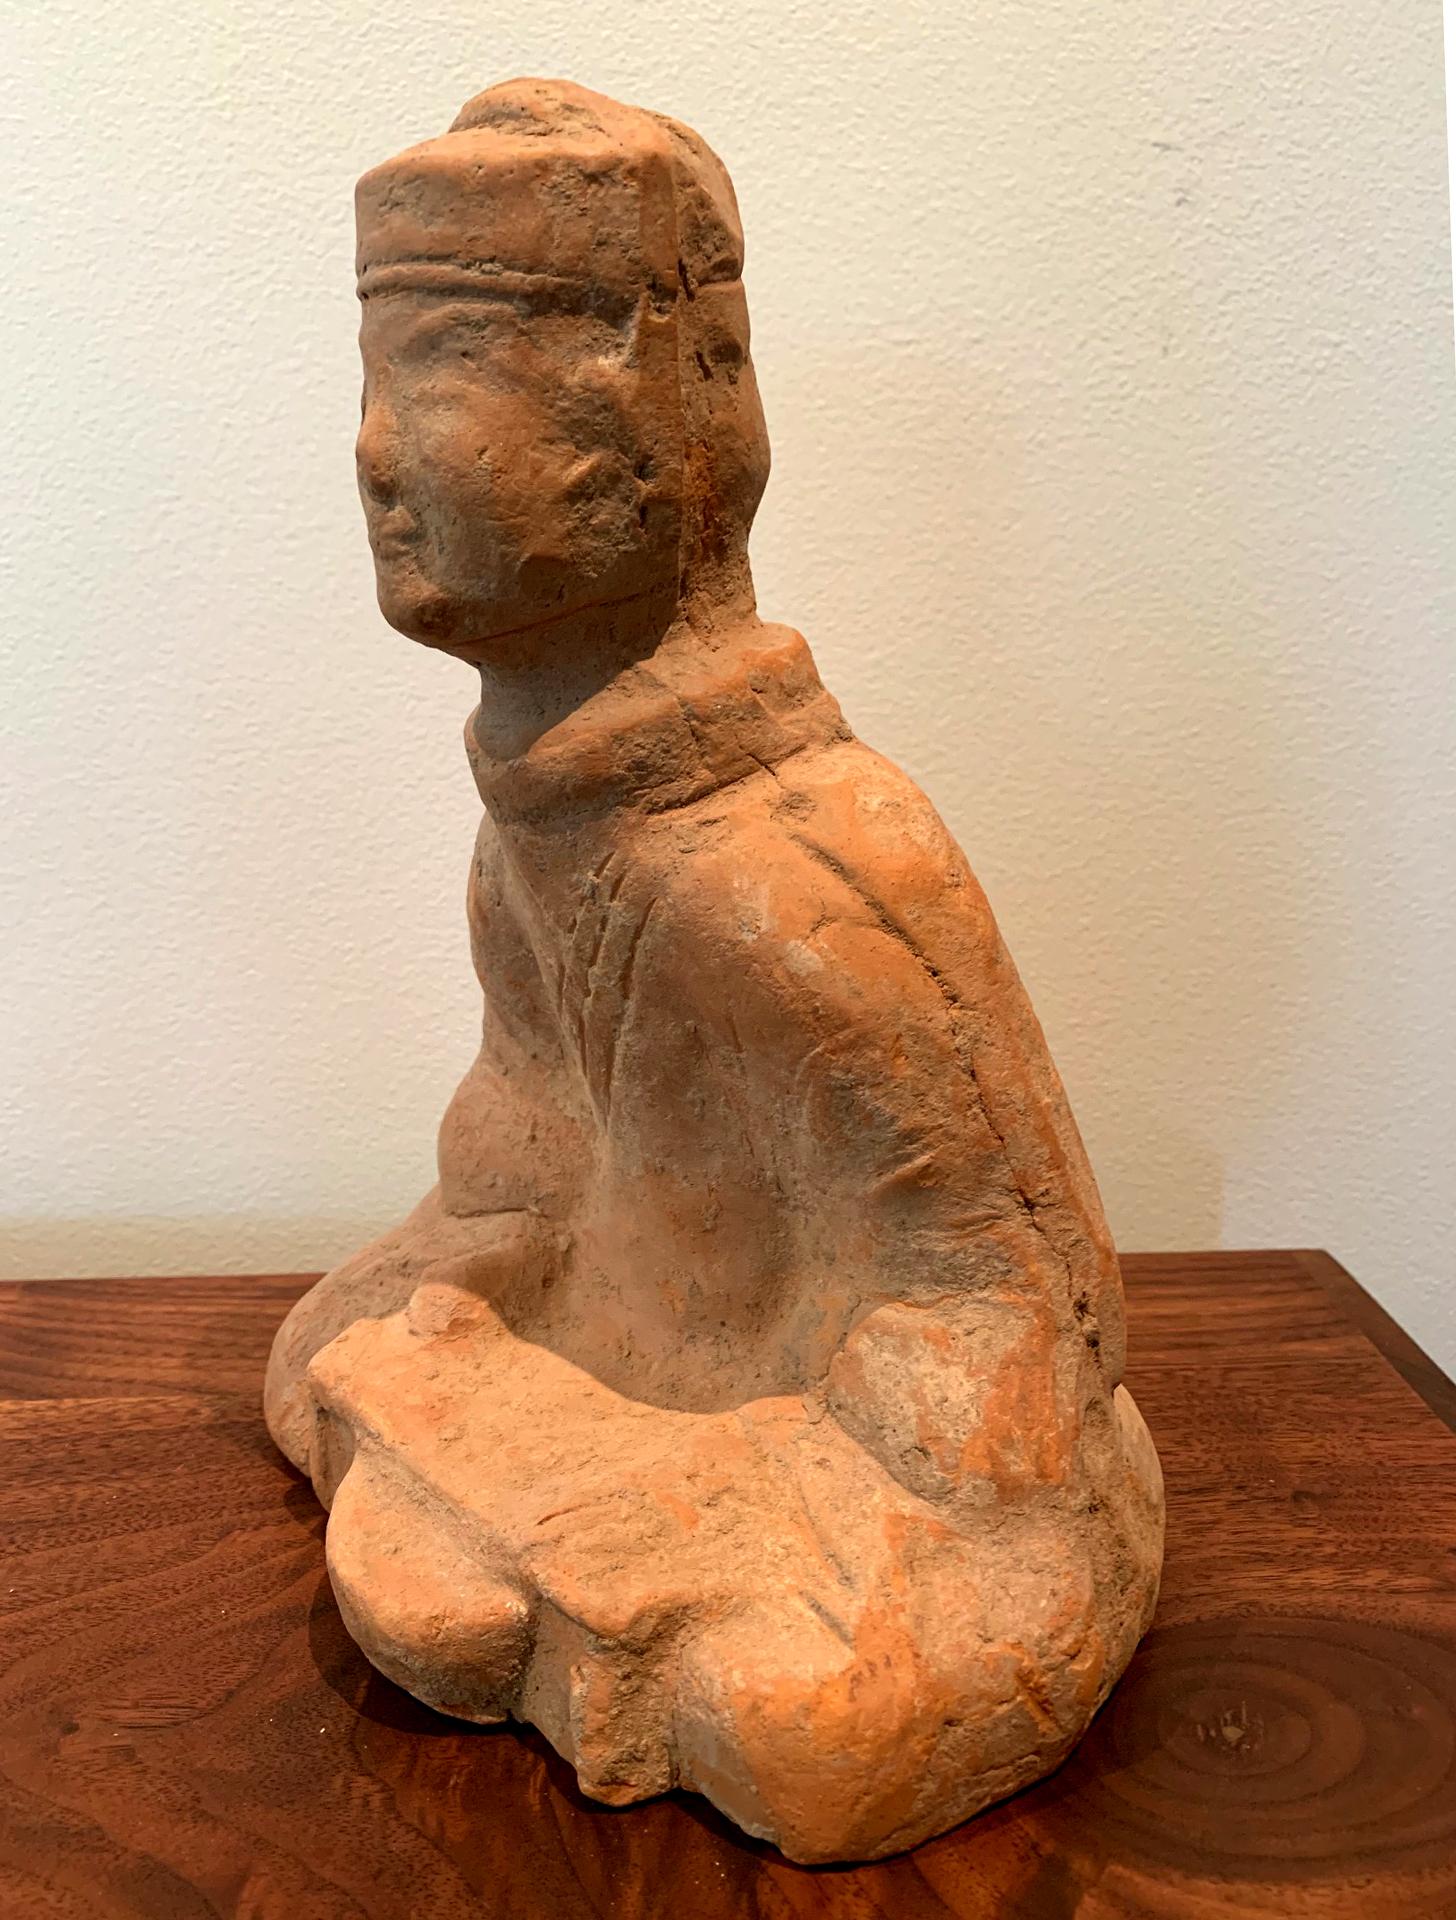 A small Chinese terracotta tomb figure (Ni Yong) from East Han dynasty (25-220 AD), likely from the area of nowadays Sichuan. It depicts a sitting male with courtly attires reading a book. His facial expression shows a faint smile. This kind of